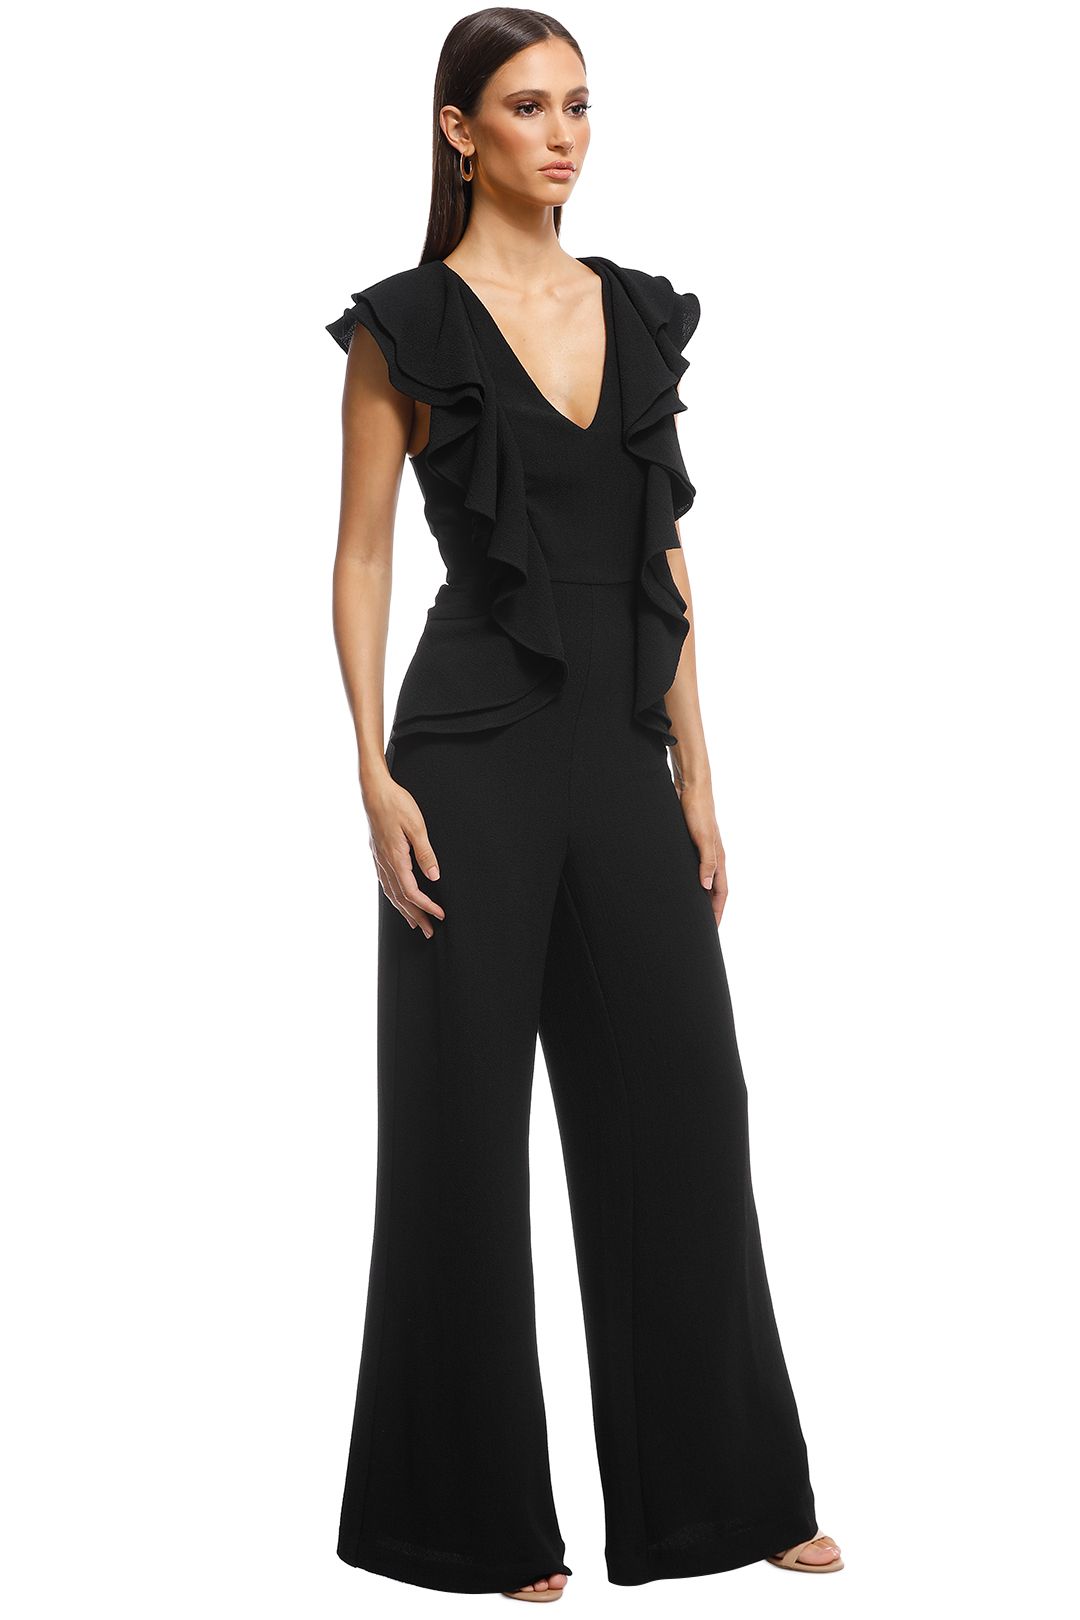 Metal Clouds Pantsuit in Black by C/MEO Collective for Rent